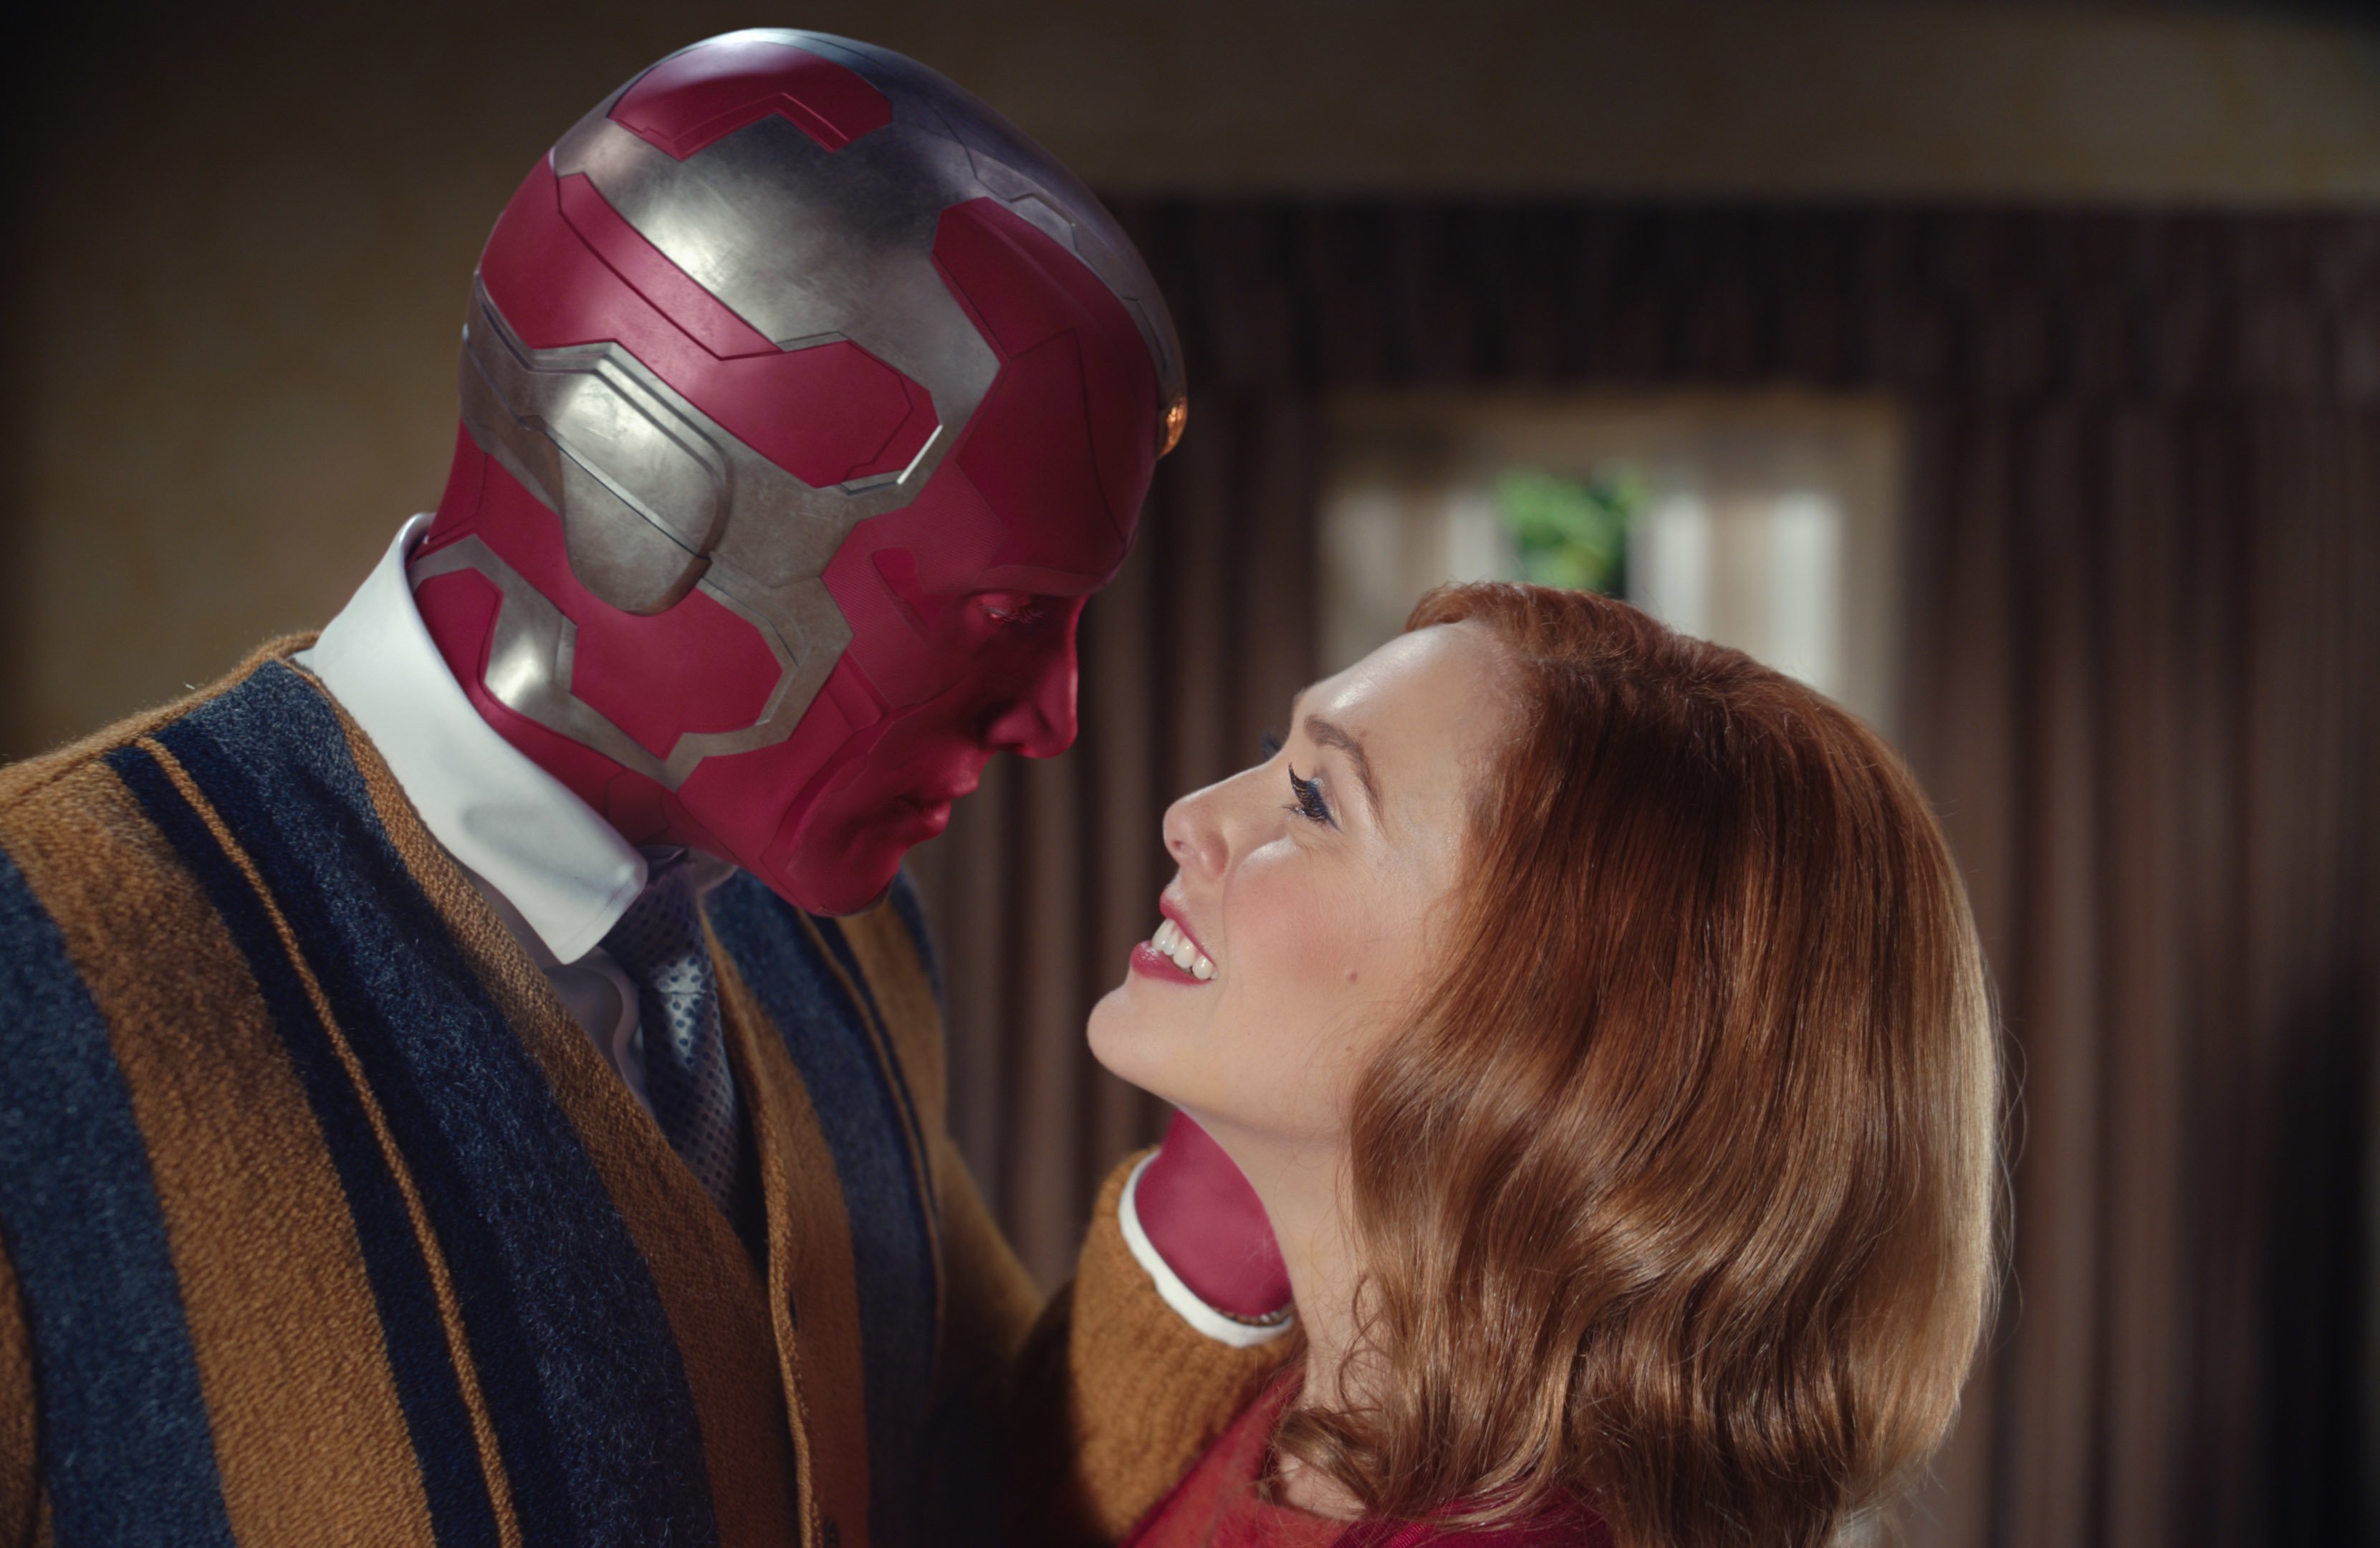 Vision and Wanda in the Emmy-winning 'WandaVision' facing each other in embrace